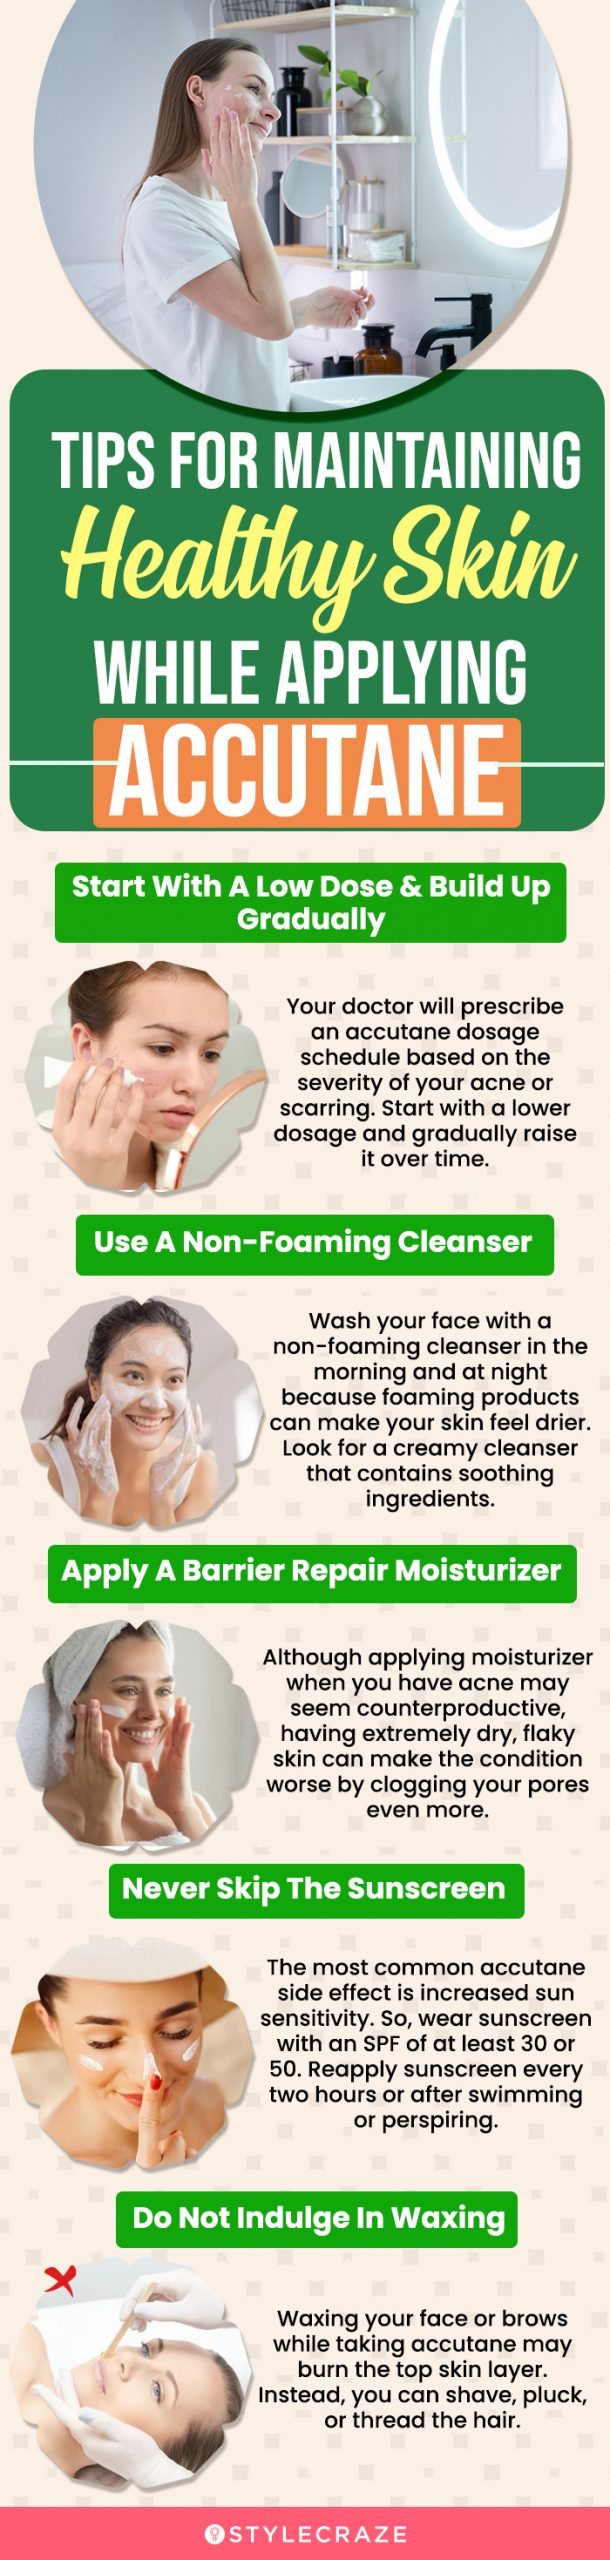 Tips For Maintaining Healthy Skin While Applying Accutane (infographic)